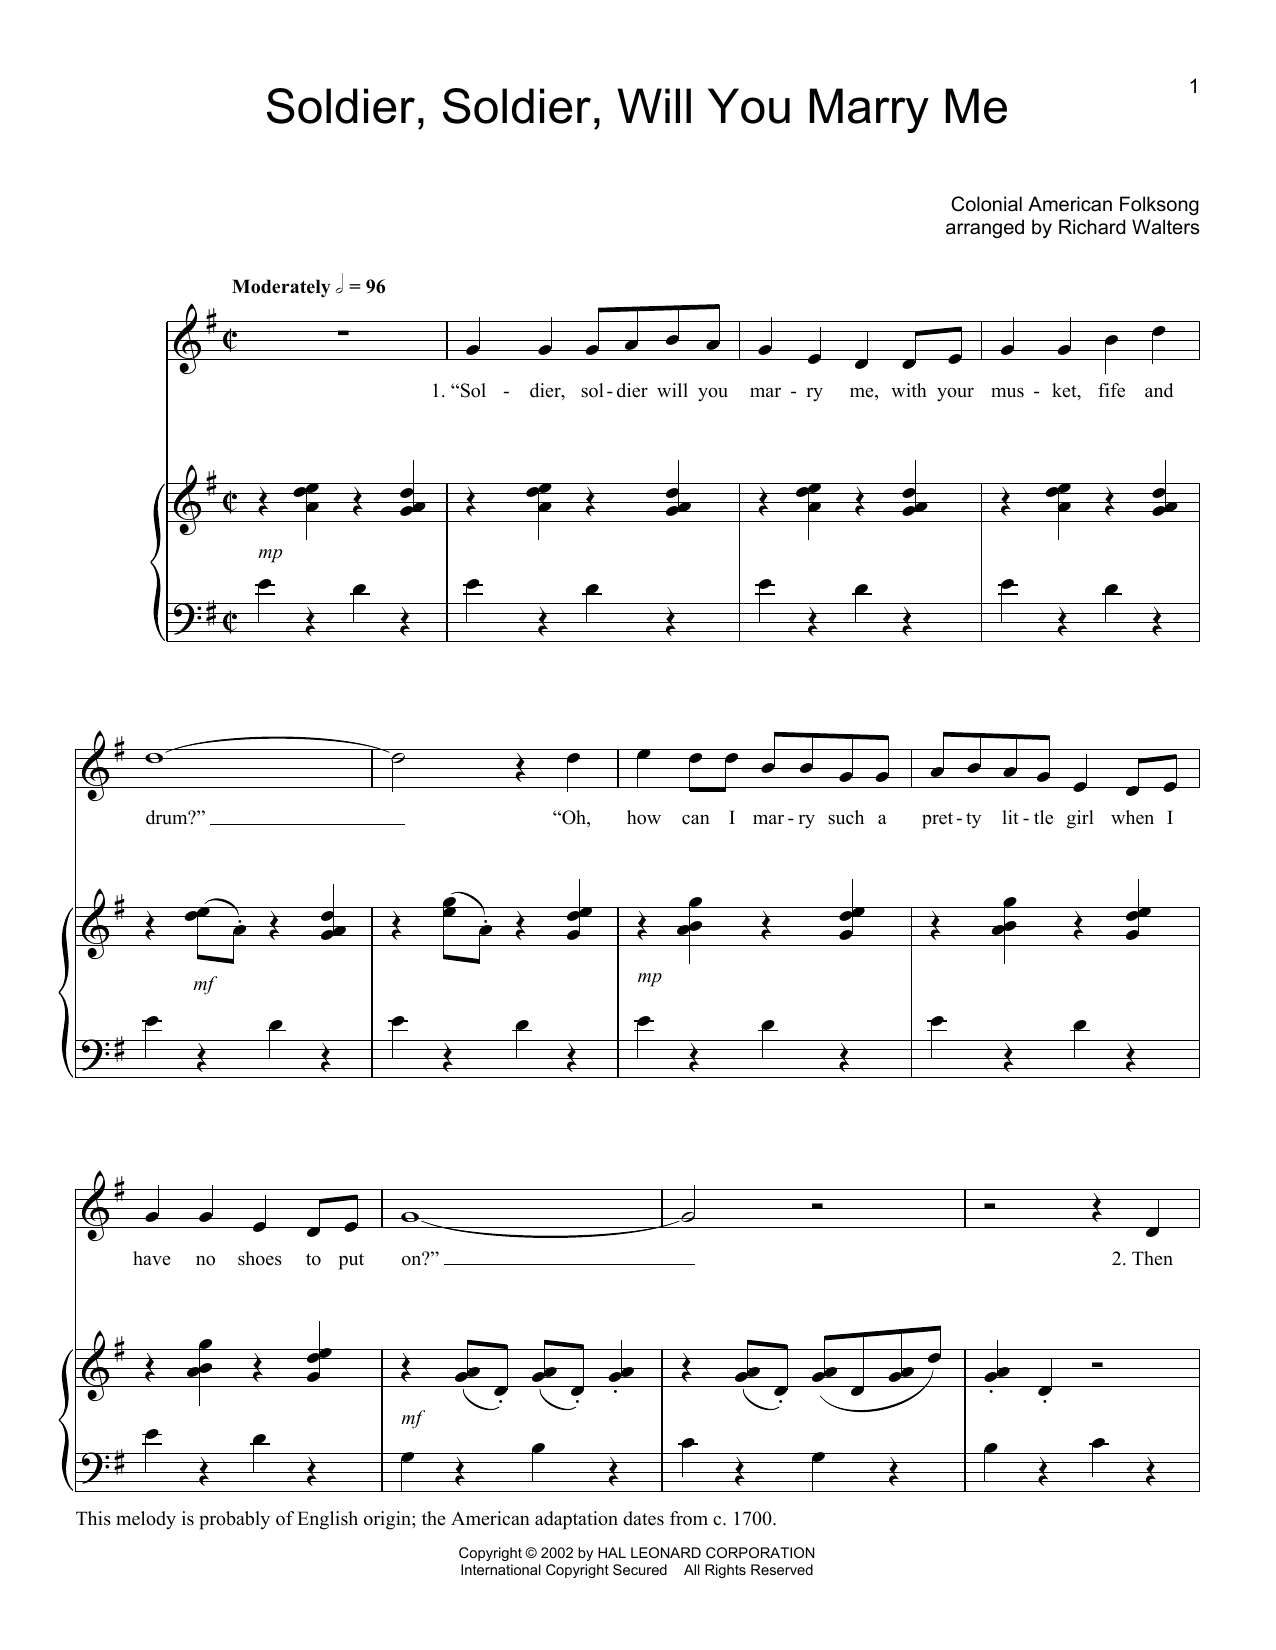 Folk Song Soldier, Soldier Will You Marry Me sheet music notes and chords. Download Printable PDF.